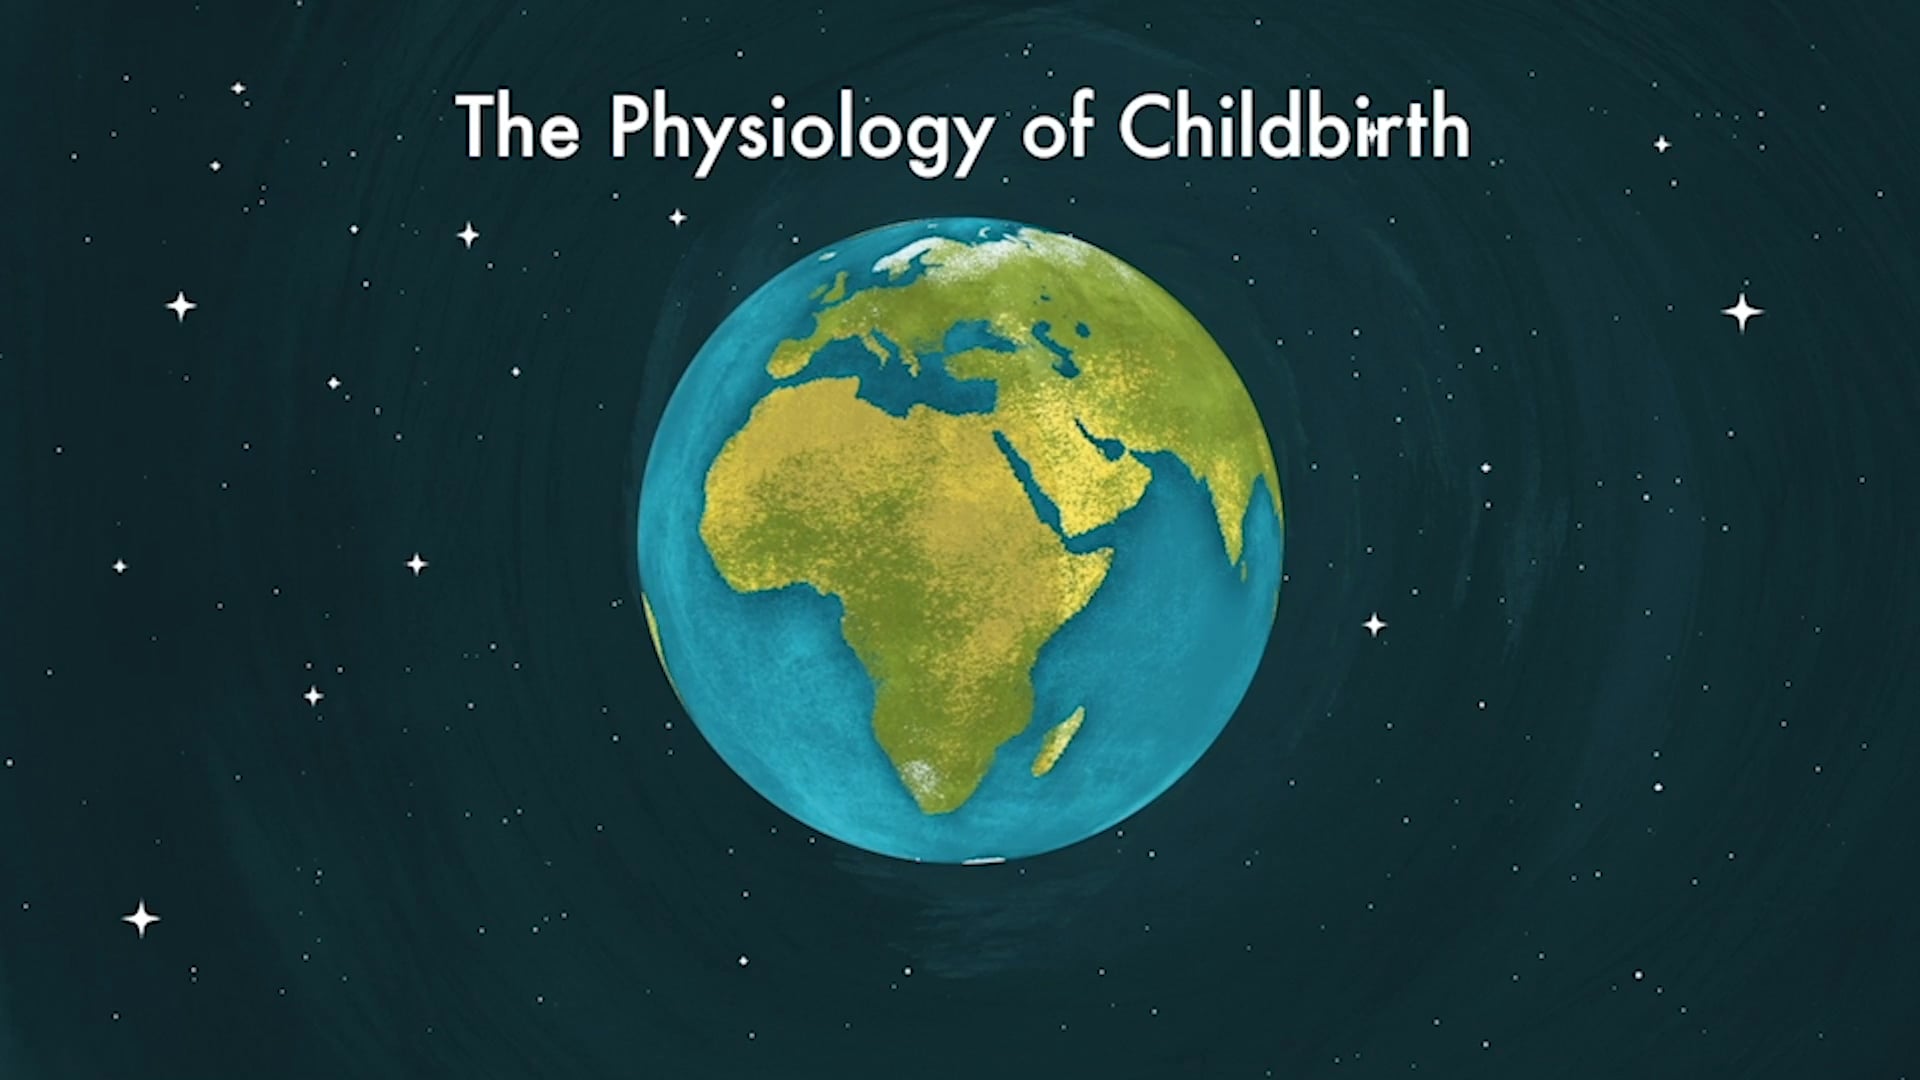 The Physiology of Childbirth